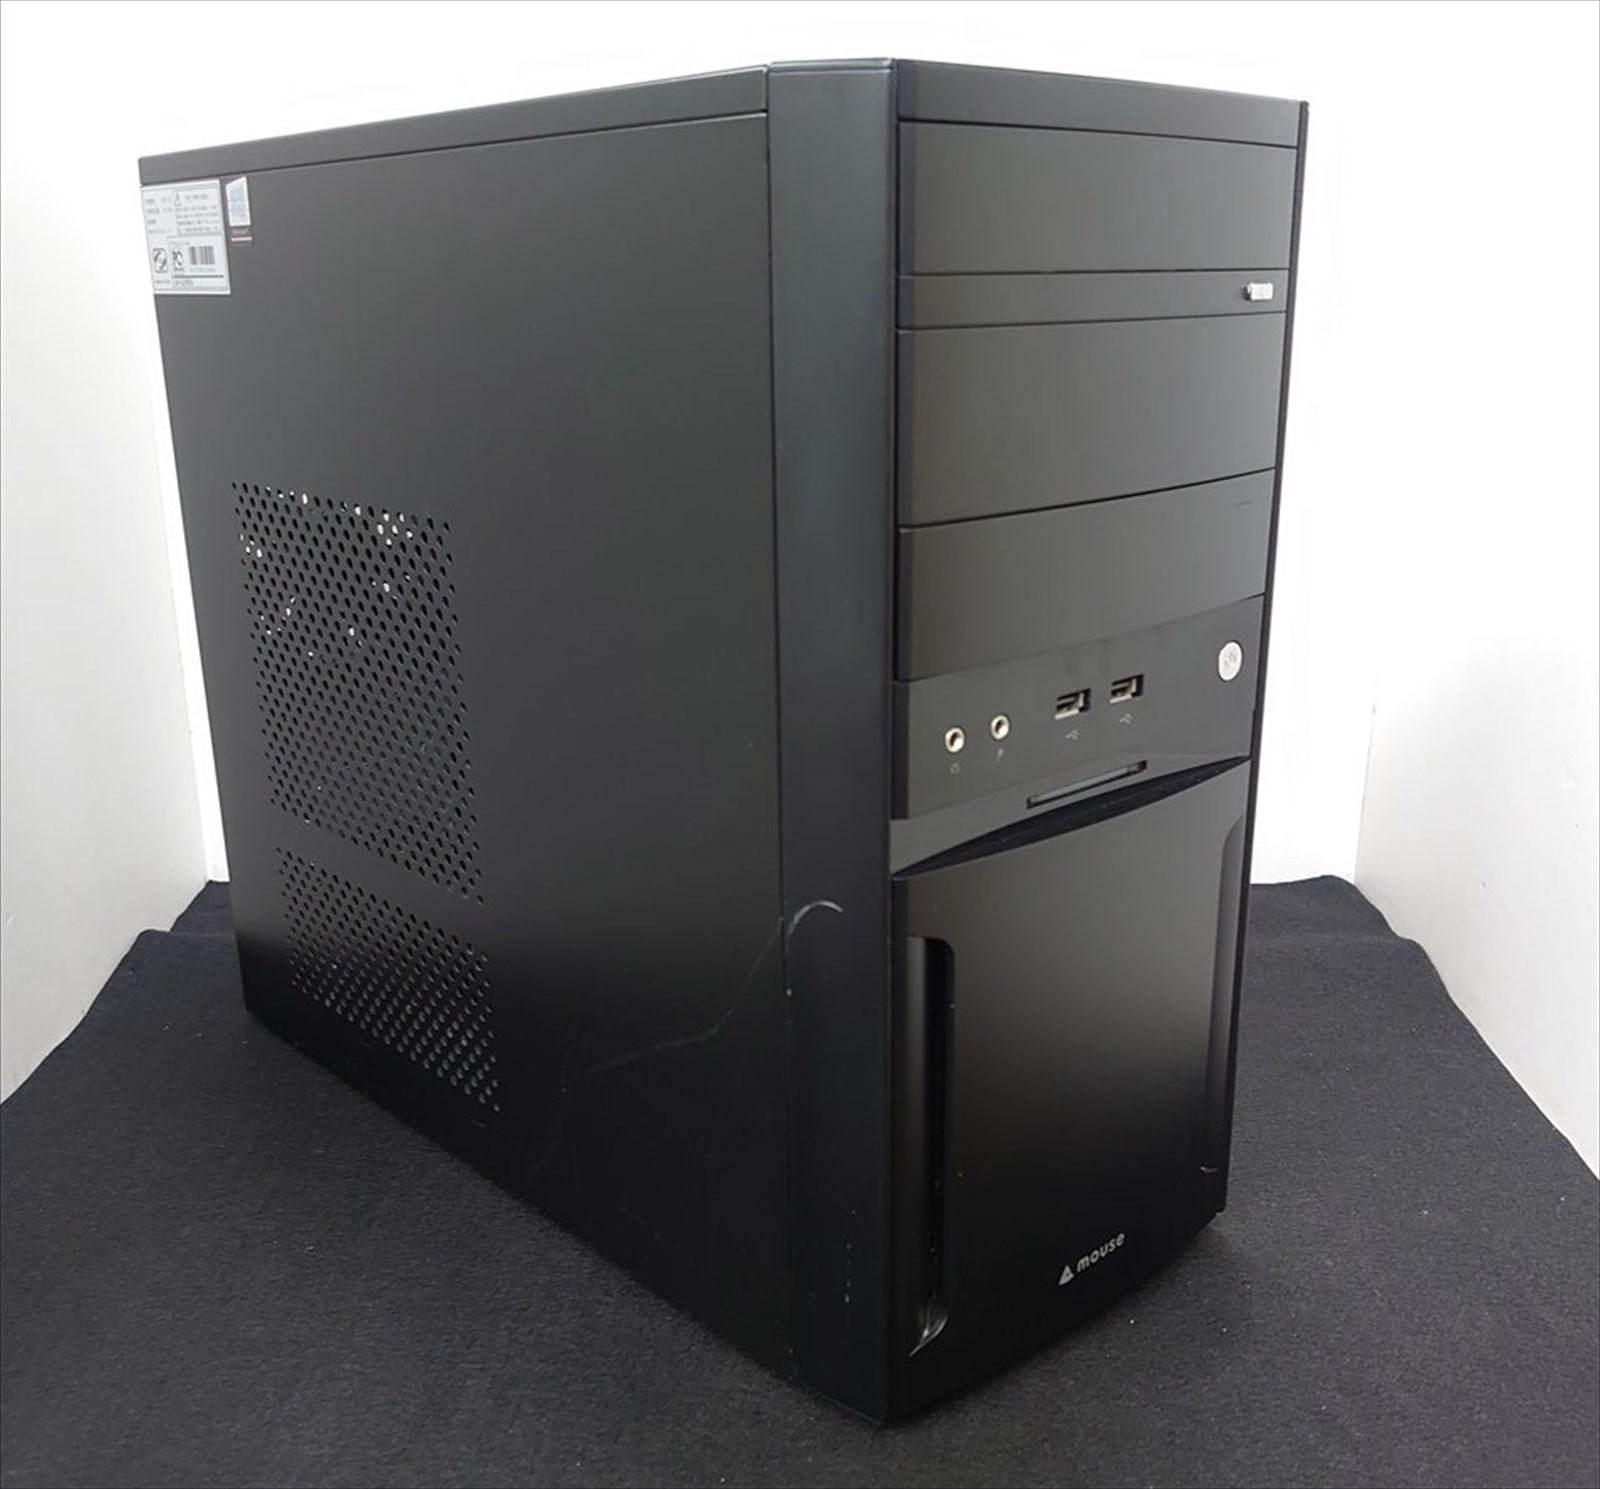 MOUSECOMPUTER ｵﾘｼﾞﾅﾙDT(CPU： Core i5 8400 2.8GHz/メモリ：16GB/SSD